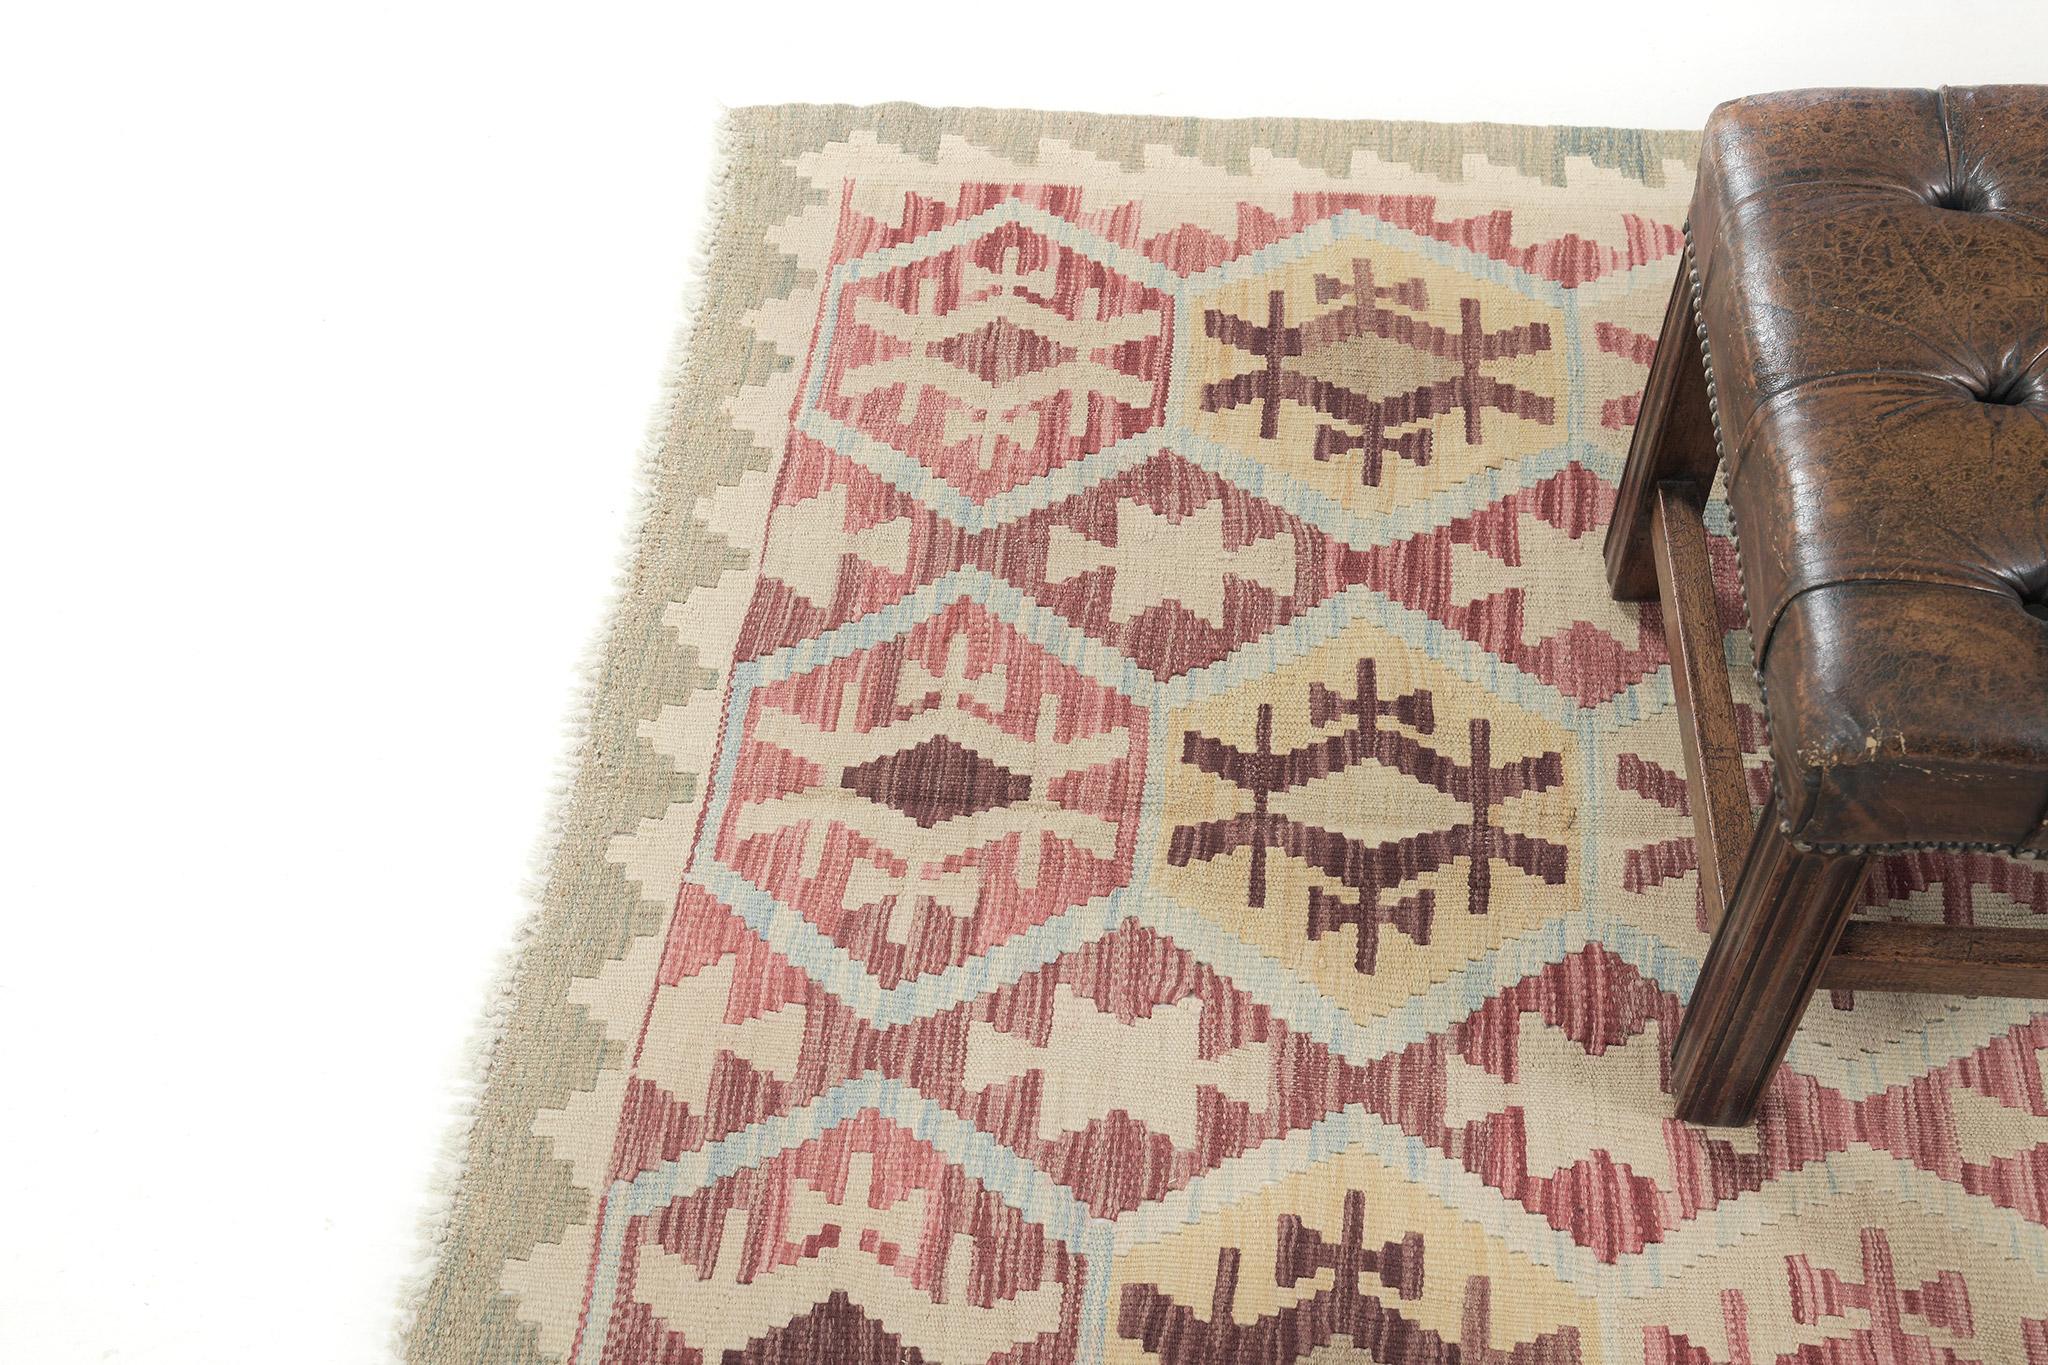 Stars and scorpion motifs are featured in this vintage style Kilim for the protection and happiness of the collector or owner. Red, yellow, and maroon are well-complemented with neutral borders. Best suited for traditional interiors and is a great